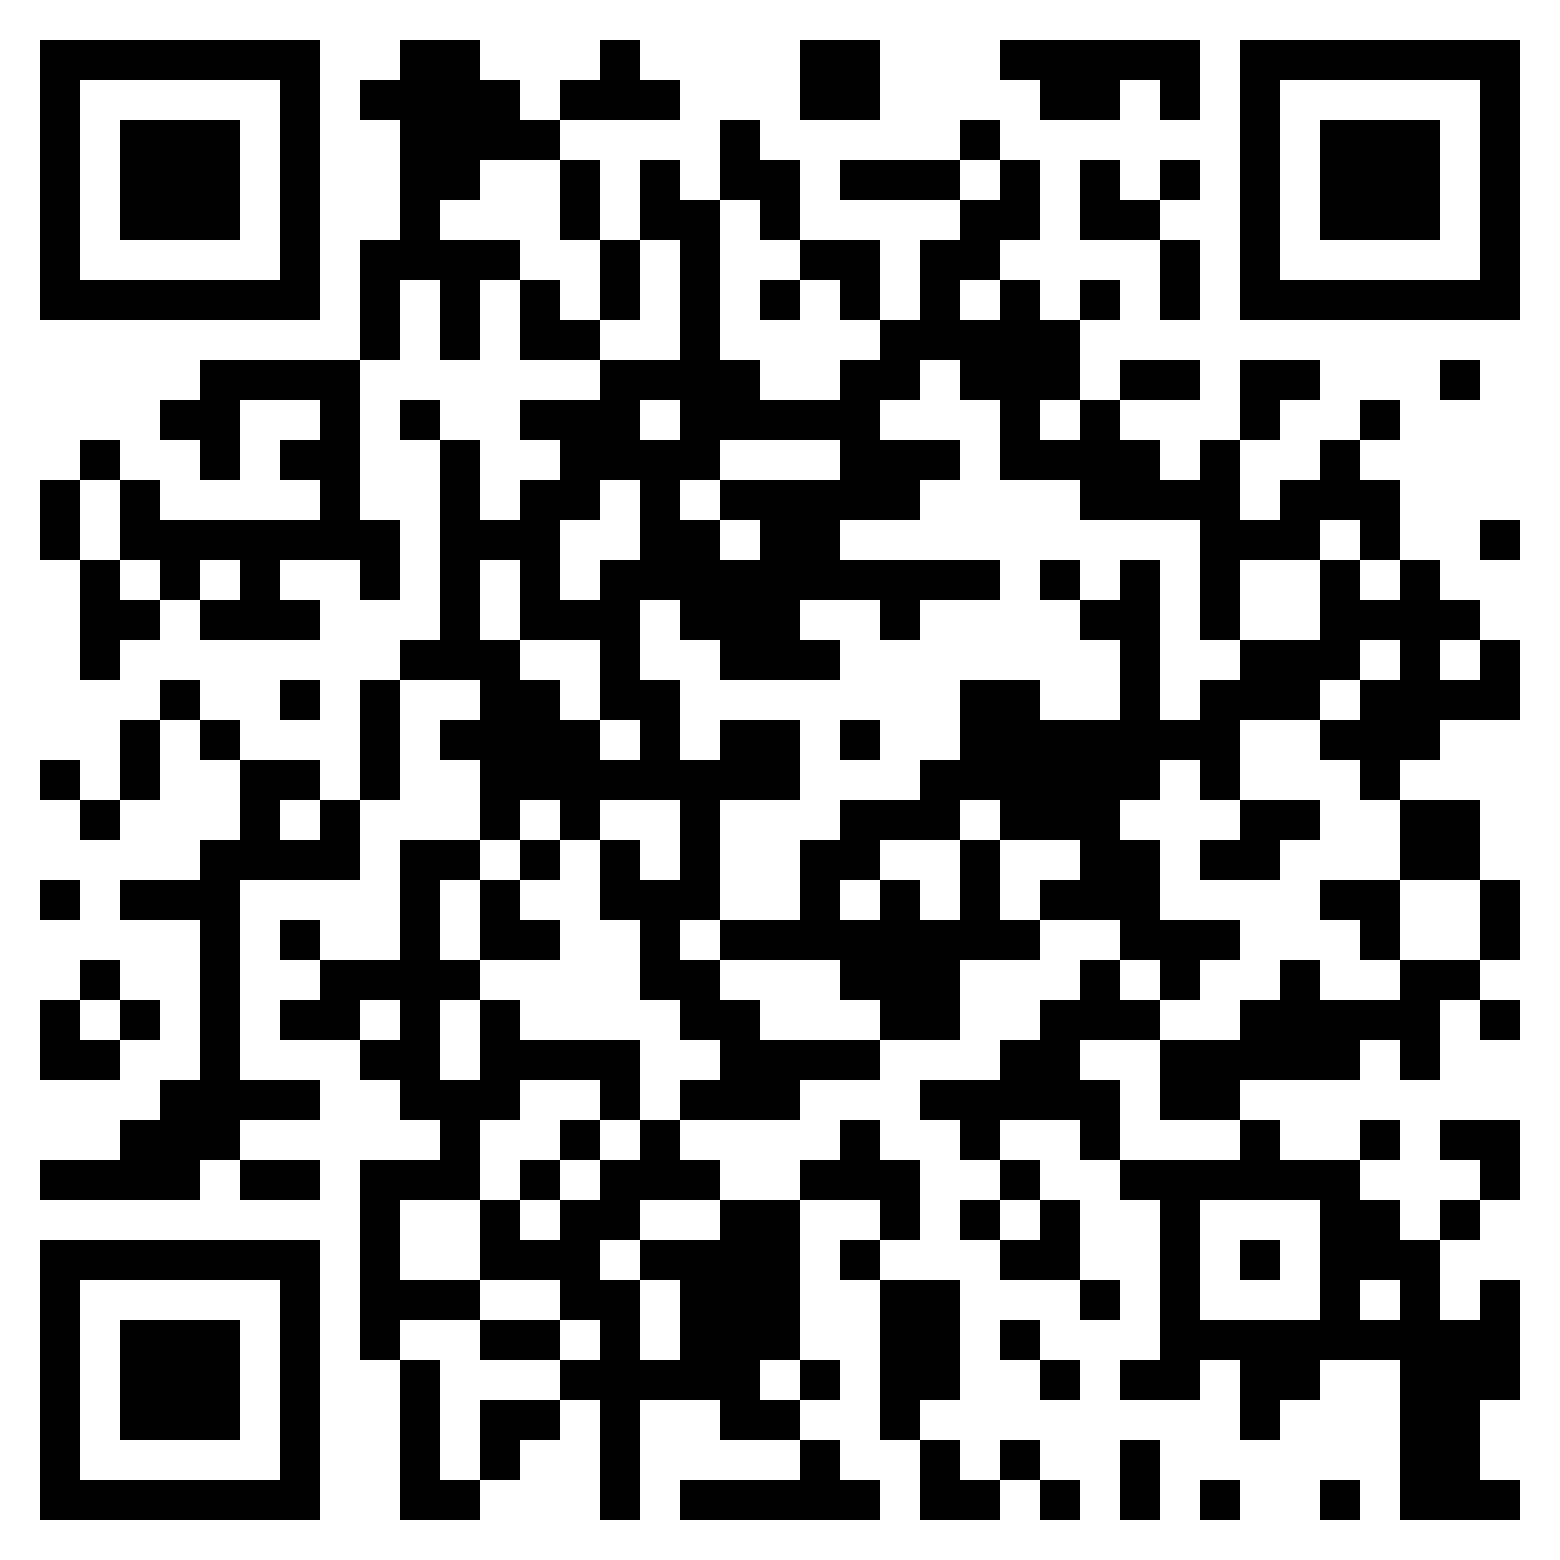 QR Code Image for The HOG 1/4" Roughing Endmill Bit For CNC Routers, 1/4" Shank